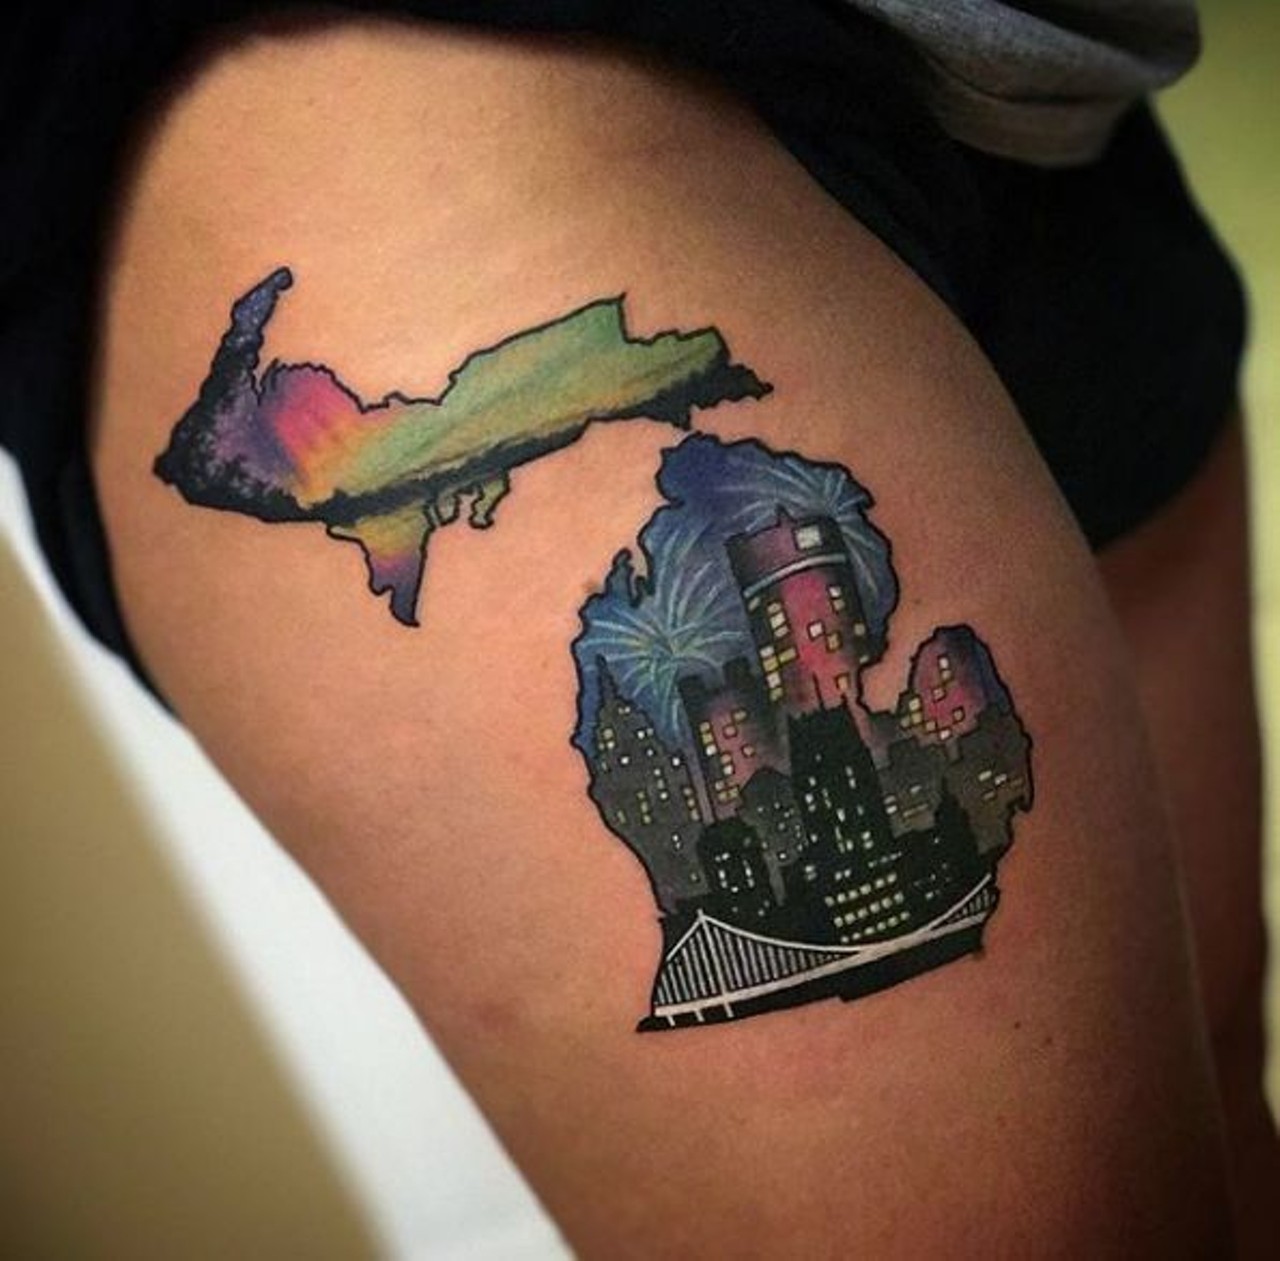 43 Spectacular State of Michigan Tattoos  TattooBlend  Michigan tattoos  Tattoos Lake tattoo